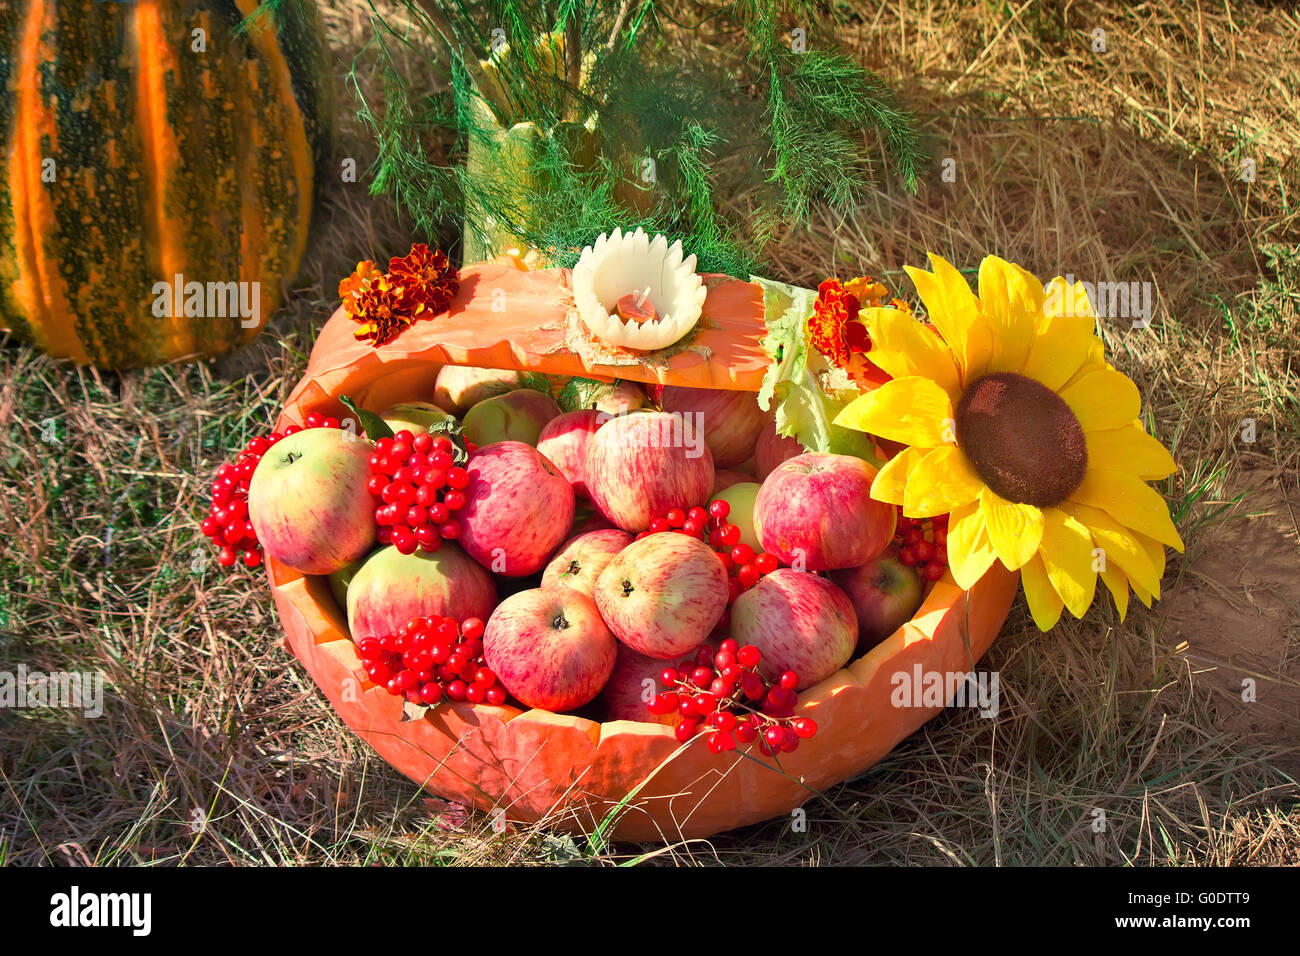 Harvest vegetables sold at the fair Stock Photo